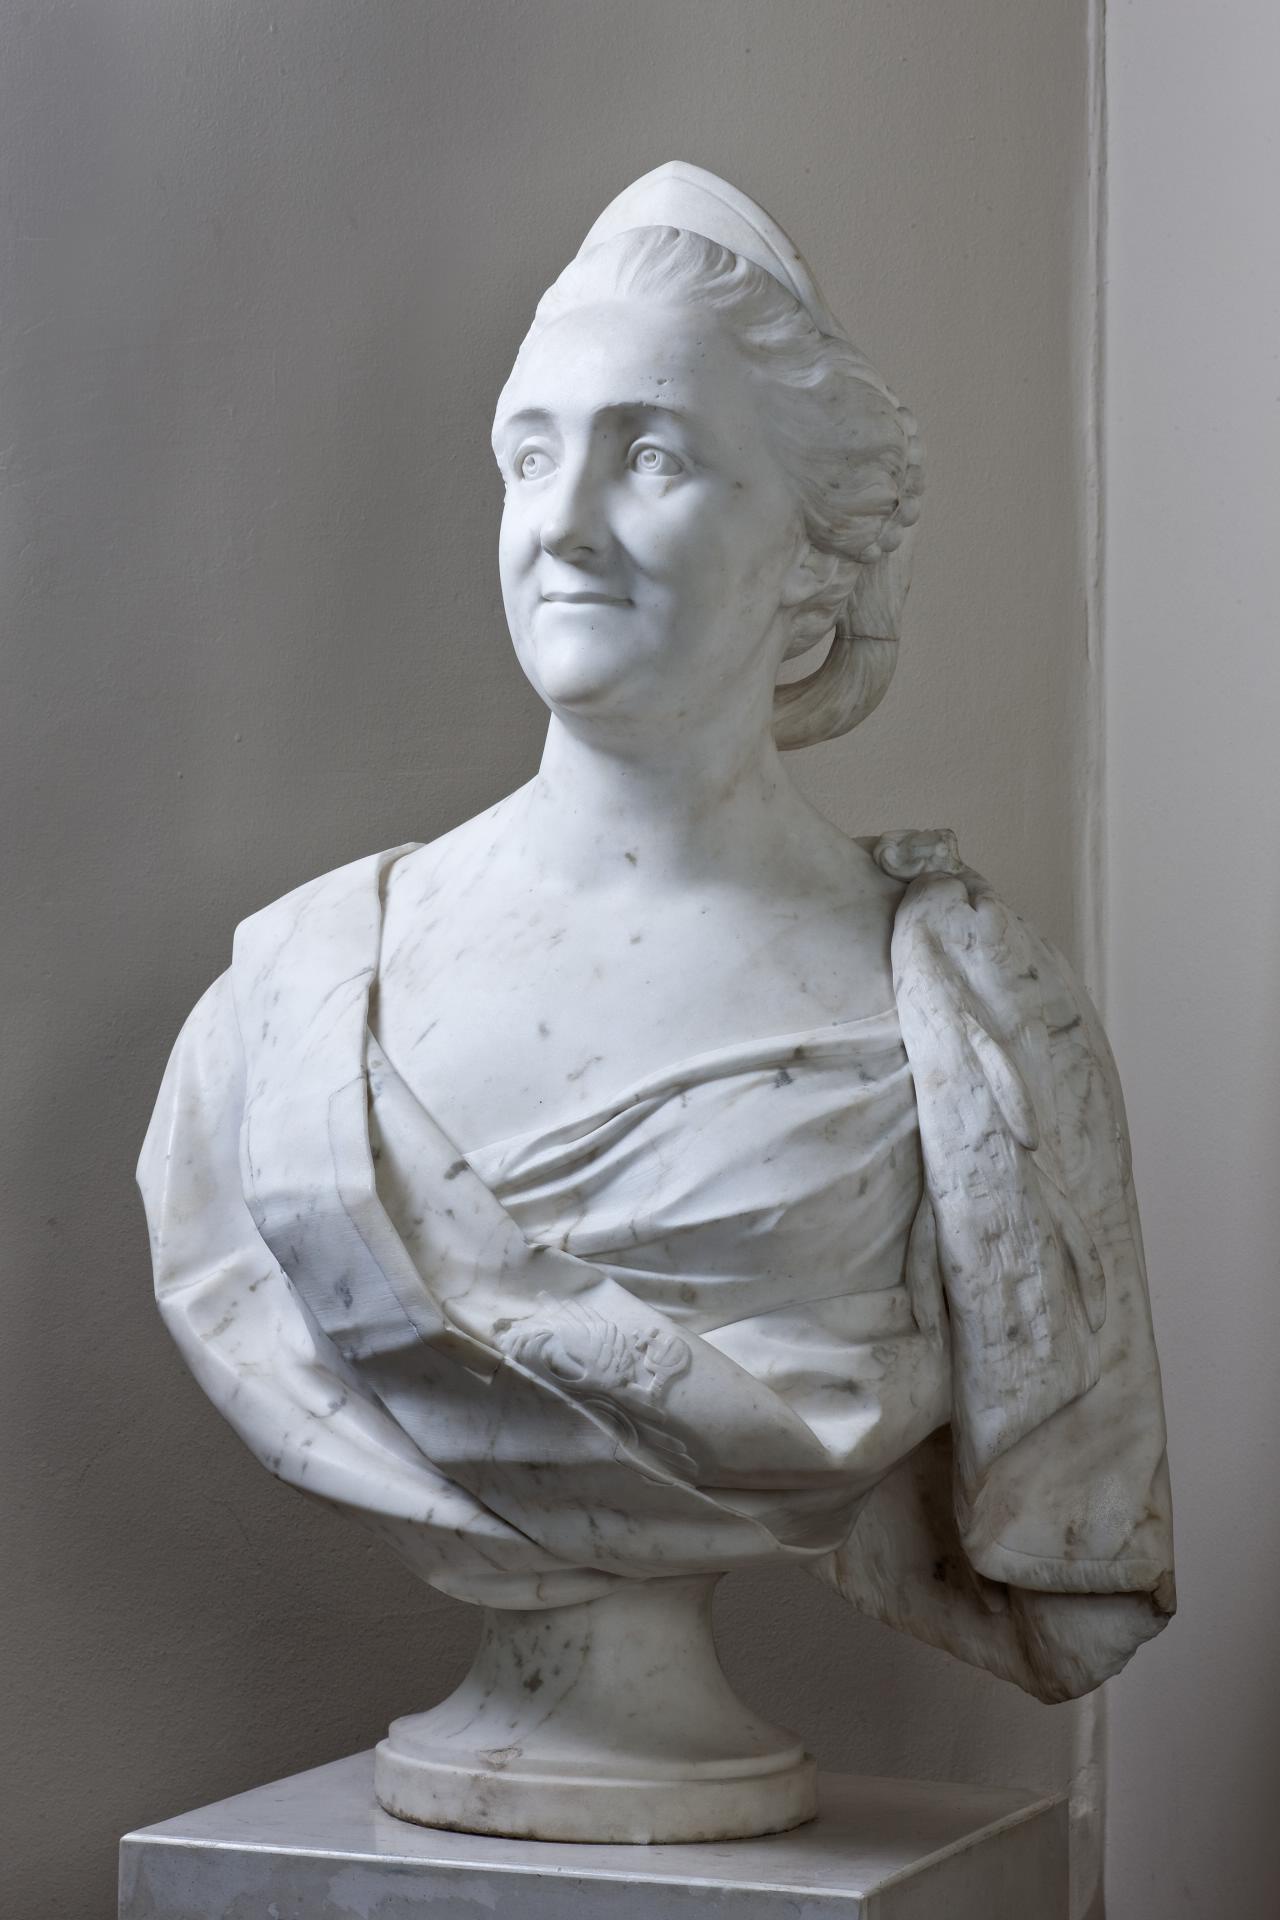 Catherine the Great by Marie-Anne Collot - 18th century - 80 x 65 cm Hermitage Museum